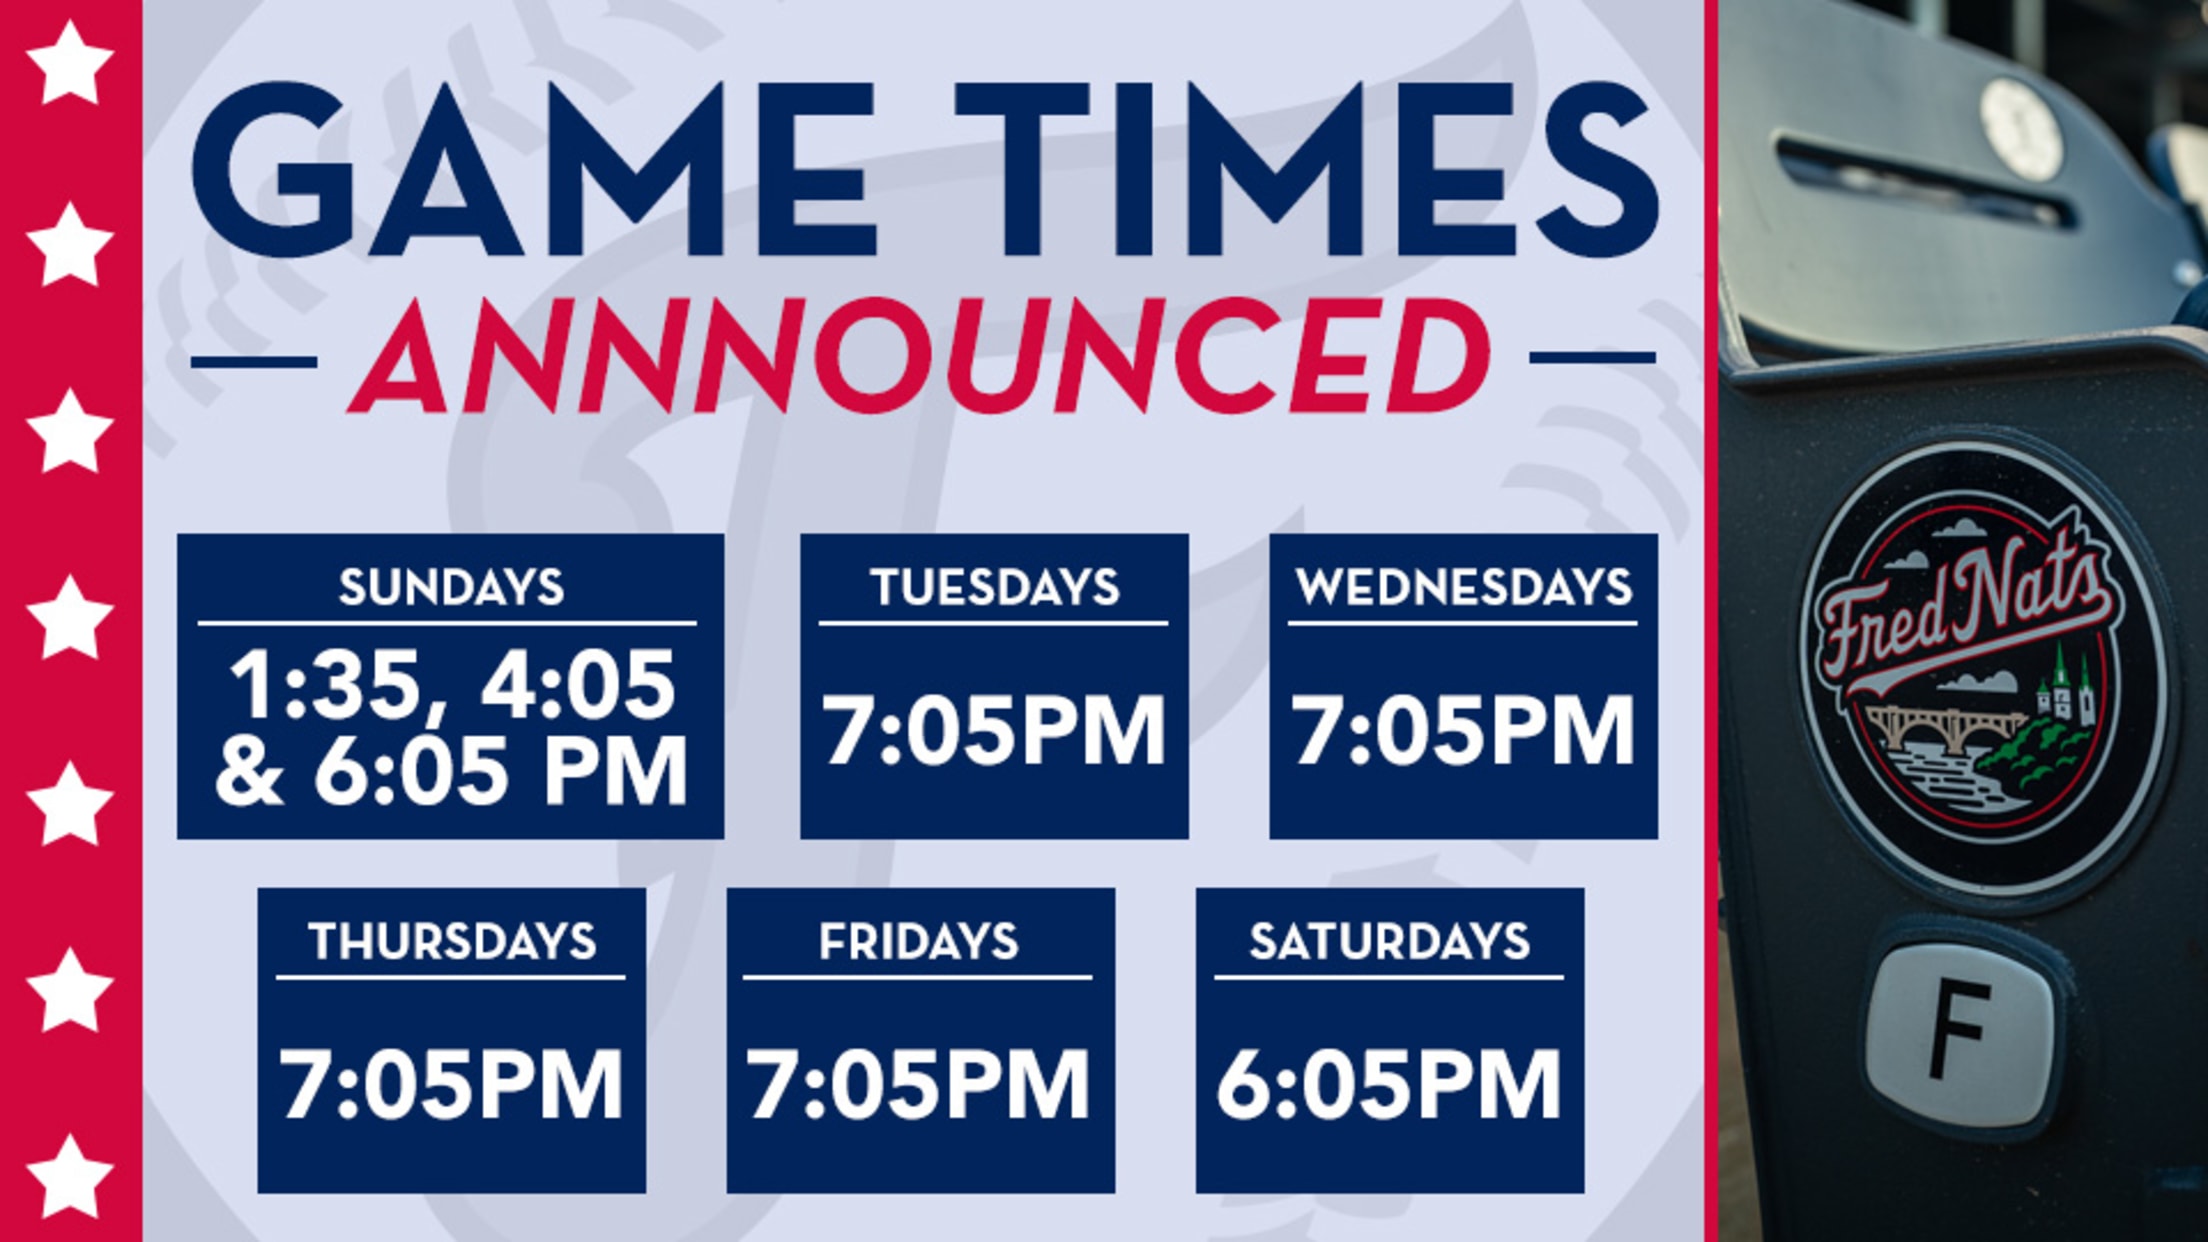 FredNats announce game times for 2021 season